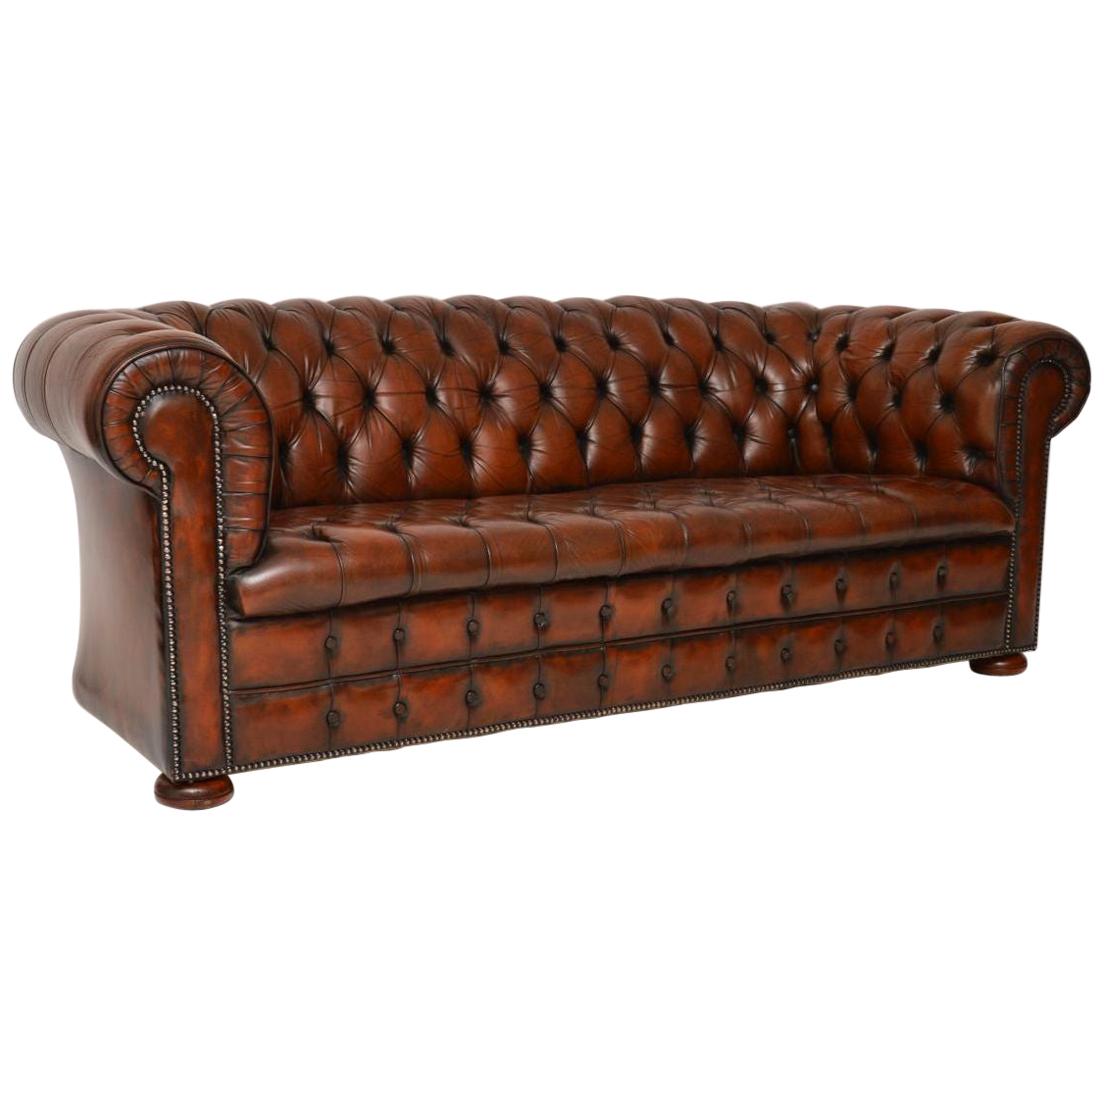 Antique Victorian Style Deep Buttoned Leather Chesterfield Sofa at 1stDibs  | victorian style leather sofa, victorian leather sofa, victorian leather  couch